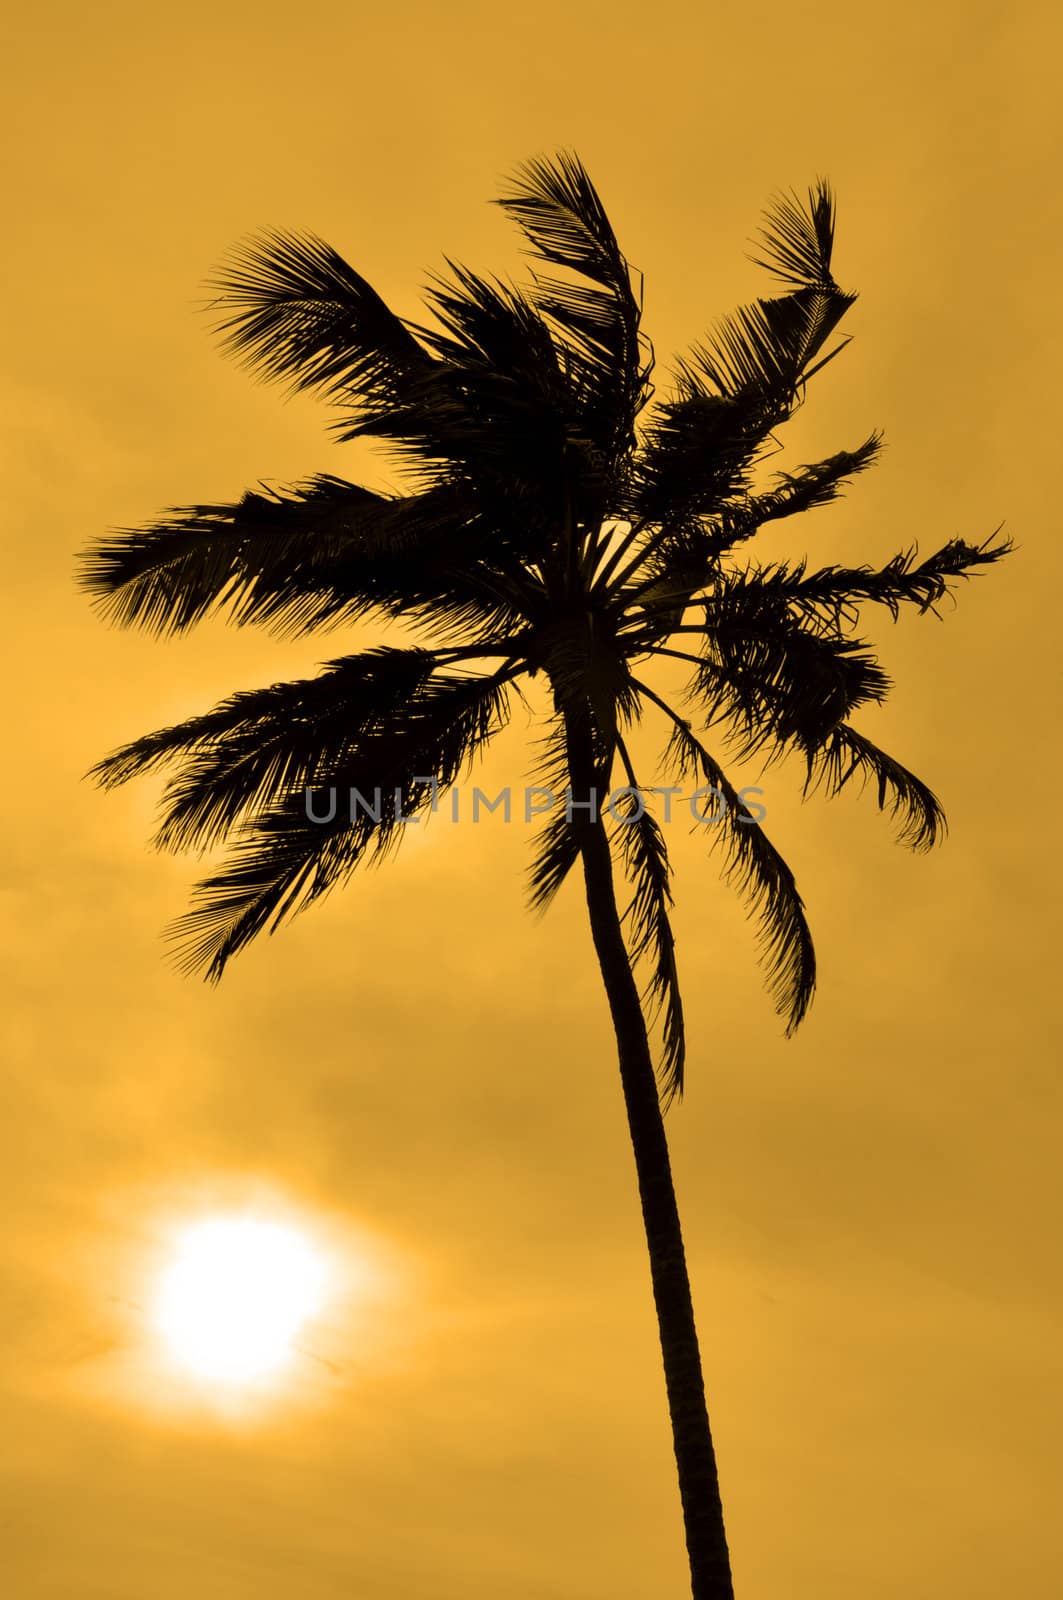 Silhouette of a Palm tree against the sun by kdreams02